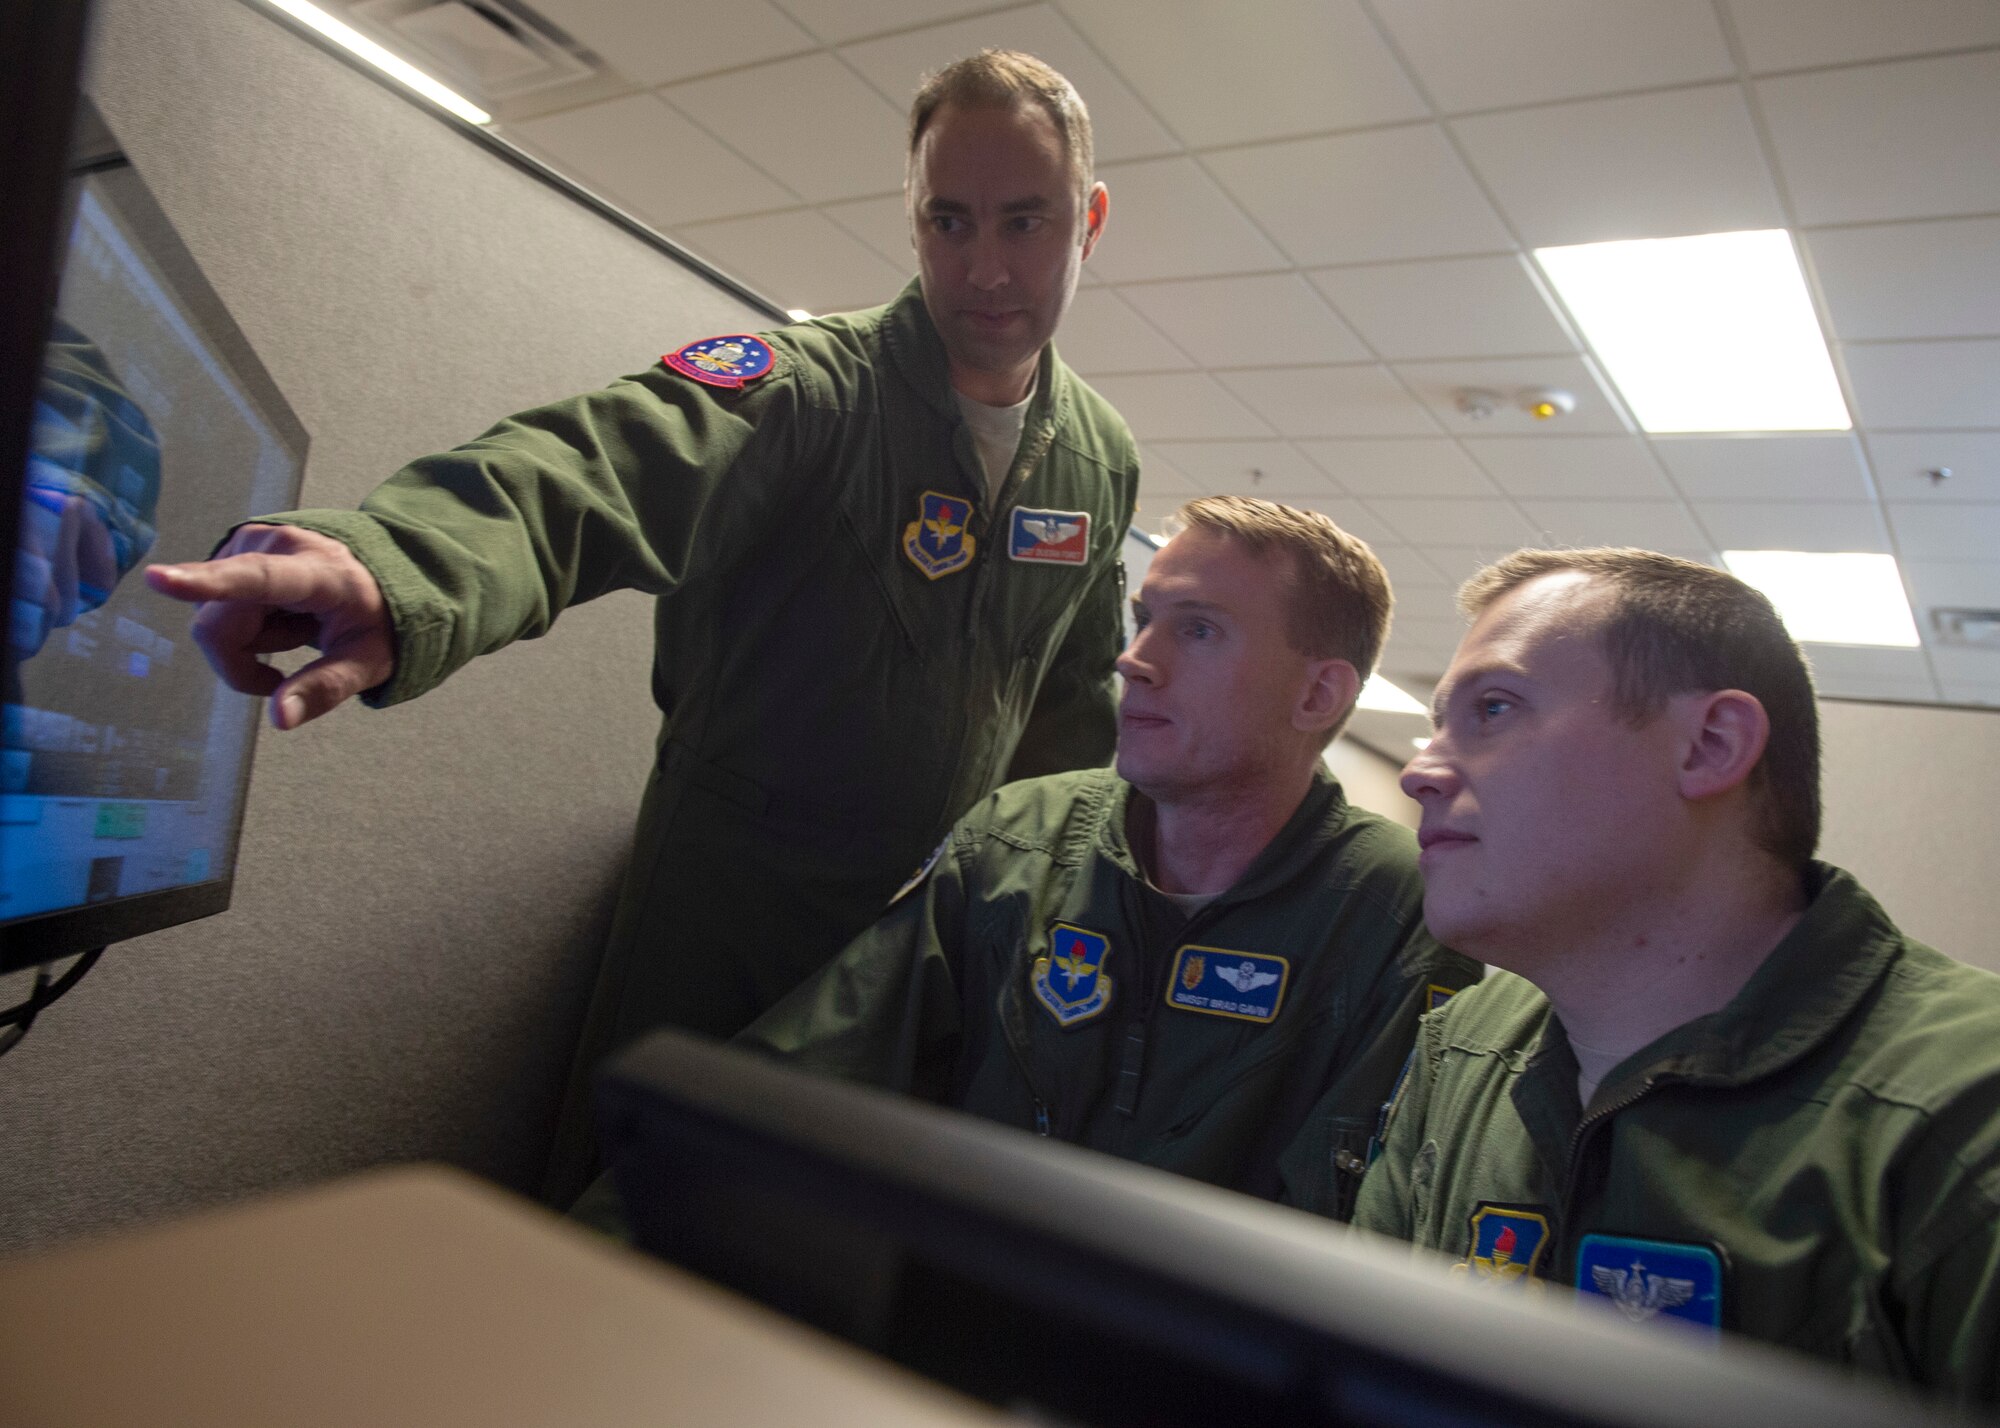 Instructors assigned to the 56th Air Refueling Squadron test the new KC-46 Pegasus PTT simulator, Dec. 20, 2019, at Altus Air Force Base, Okla. The KC-46 is the new in-air refueling aircraft purchased by the United States Air Force. (U.S. Air Force Photo by Senior Airman Jackson N. Haddon)